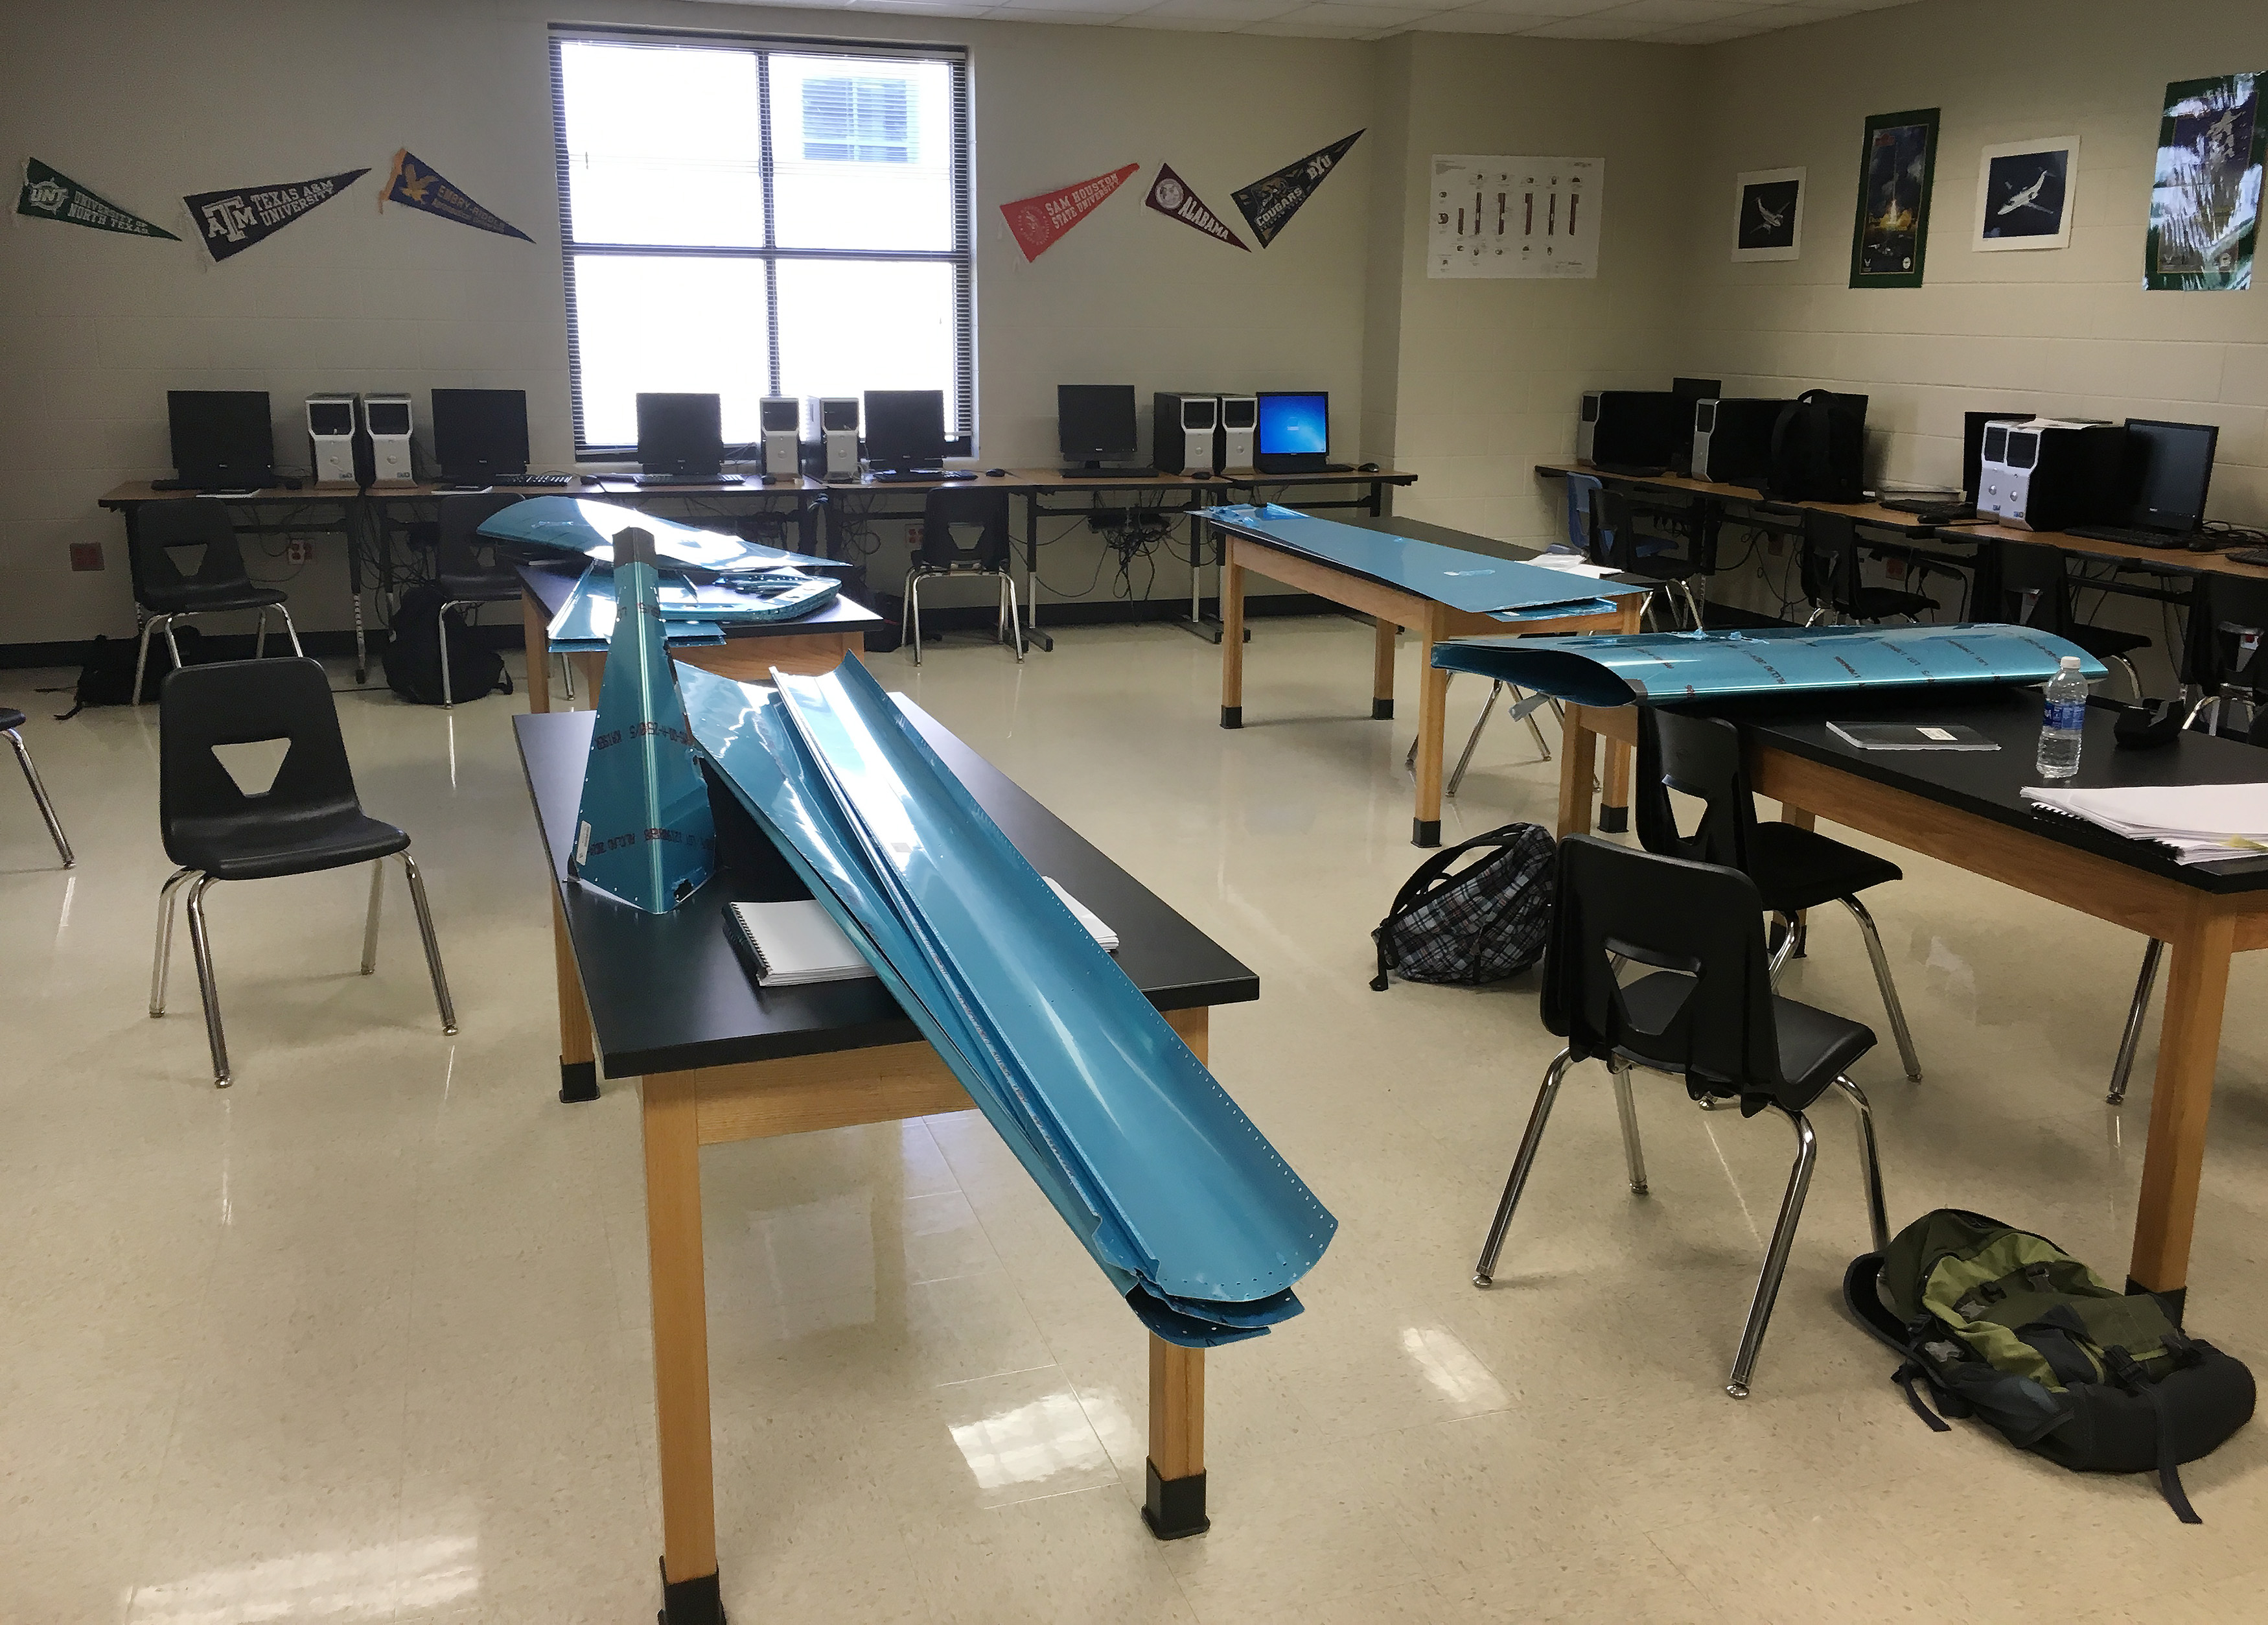 Engineering teacher Dan Weyant introduced a Van's Aircraft RV-12 airplane build project to high schools in Georgetown, Texas, as part of their science, technology, engineering, and math-driven curriculum. Photo courtesy of Dan Weyant.